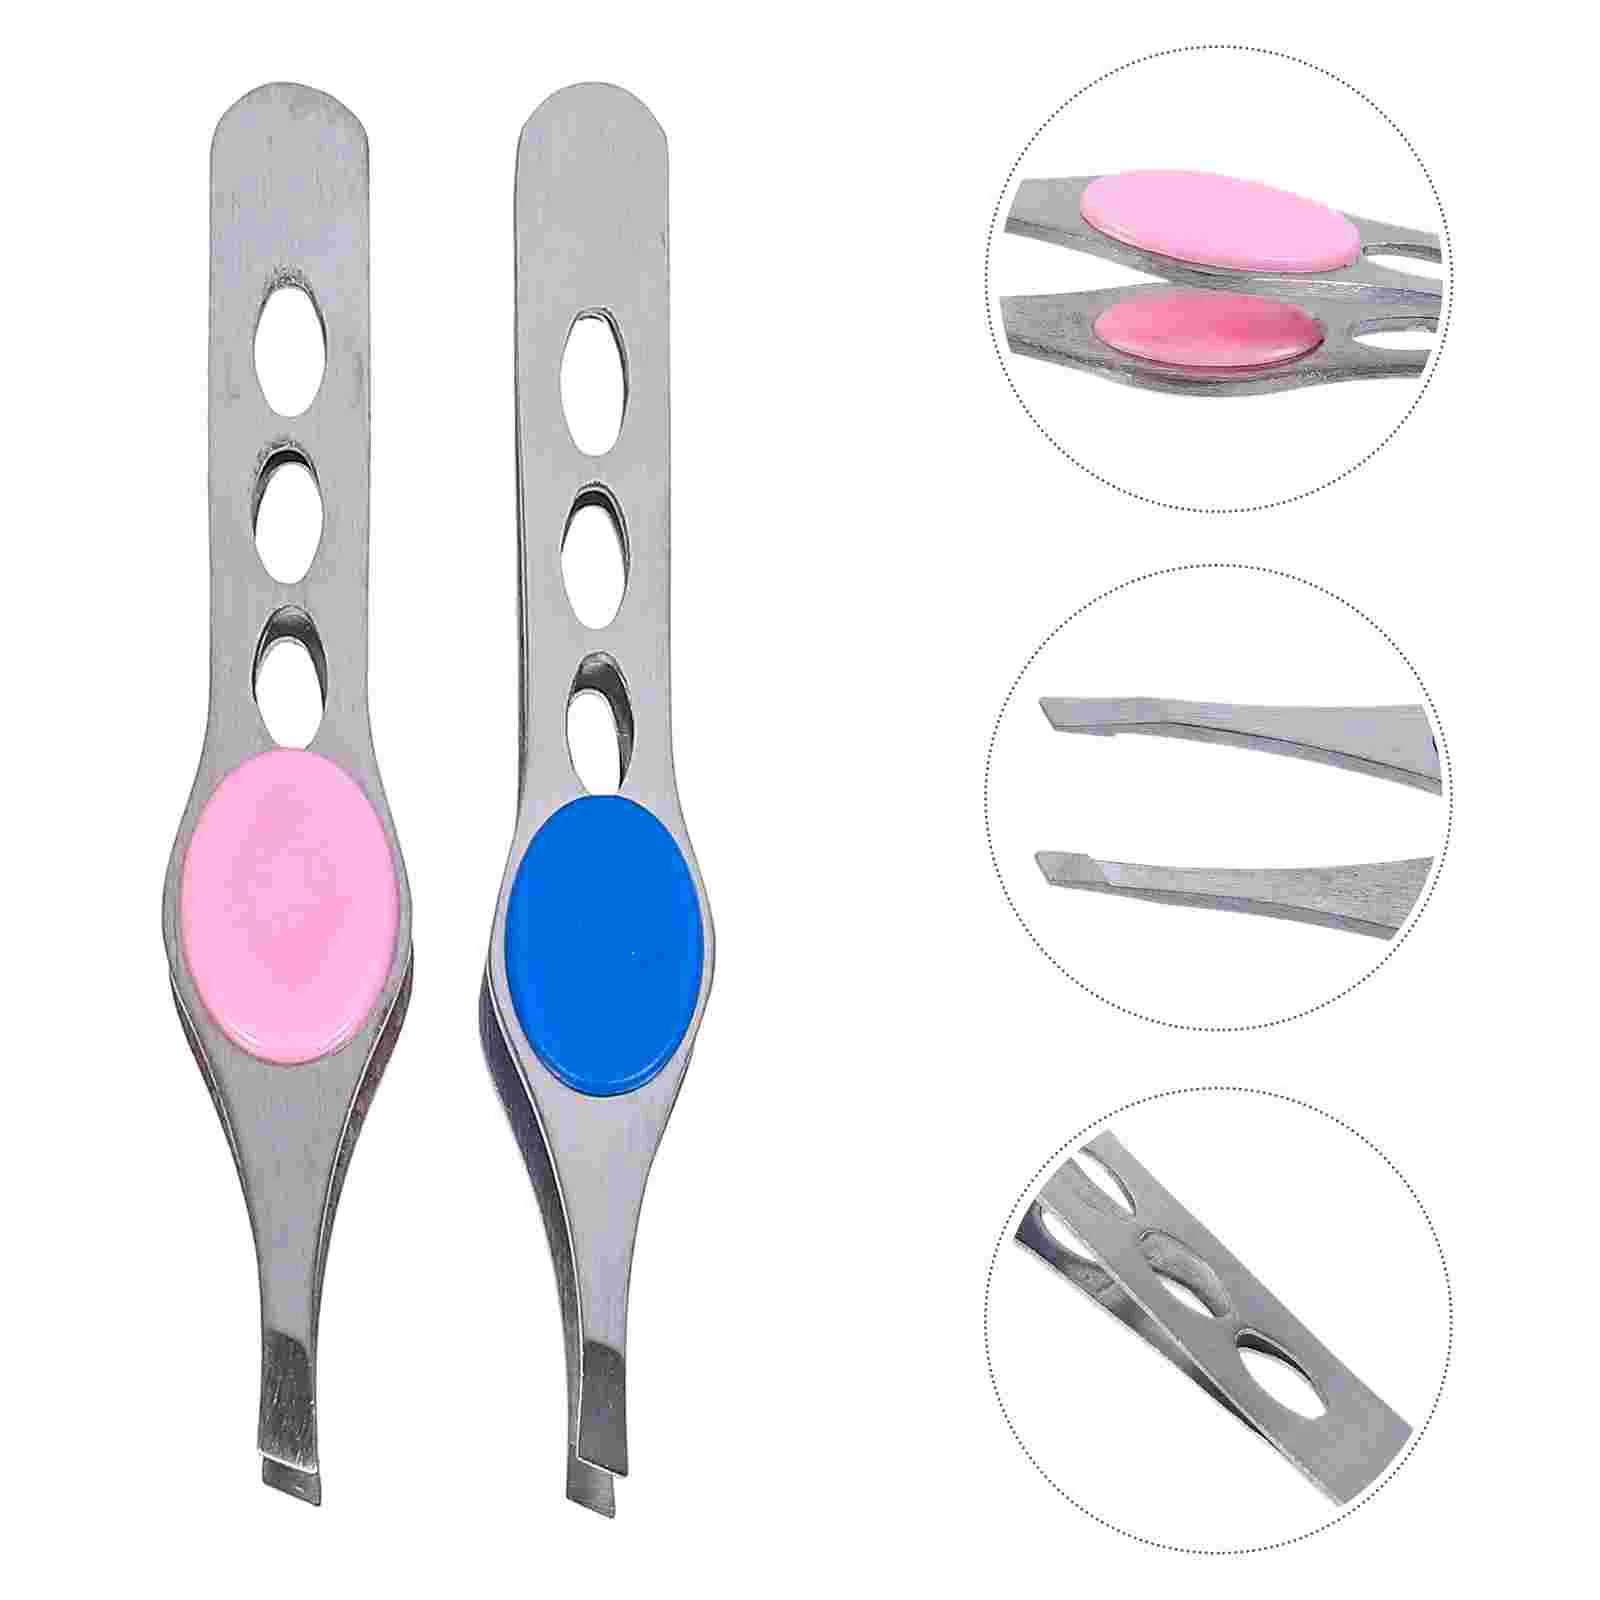 

4Pcs Trimmer Grooming Kit Precision Tweezers for Eyebrows Clips Clamp